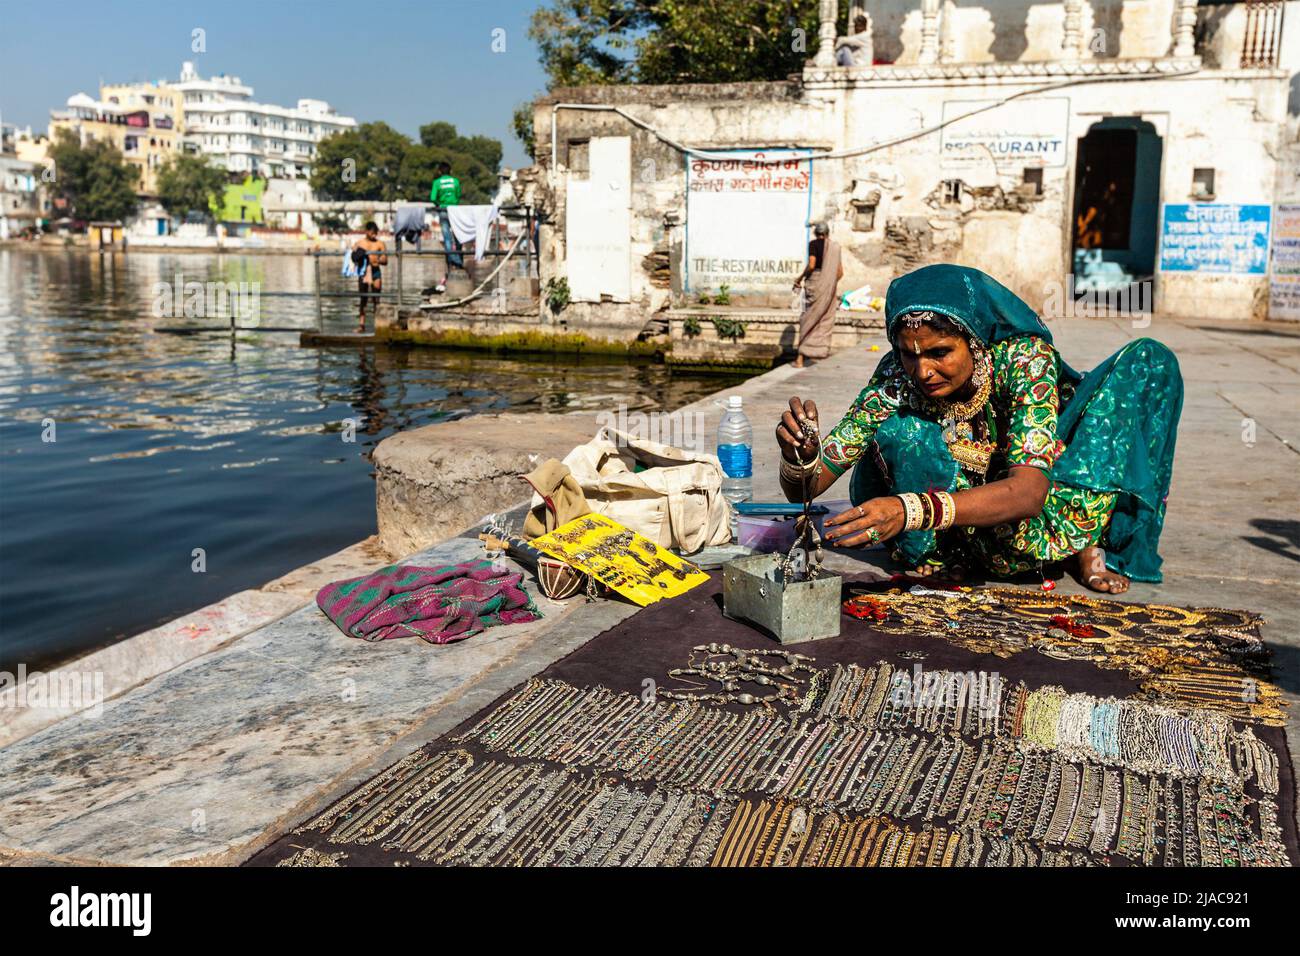 Woman in traditional clothing selling jewellery on ghat of Lake Pichola. Udaipur, Rajasthan, India Stock Photo